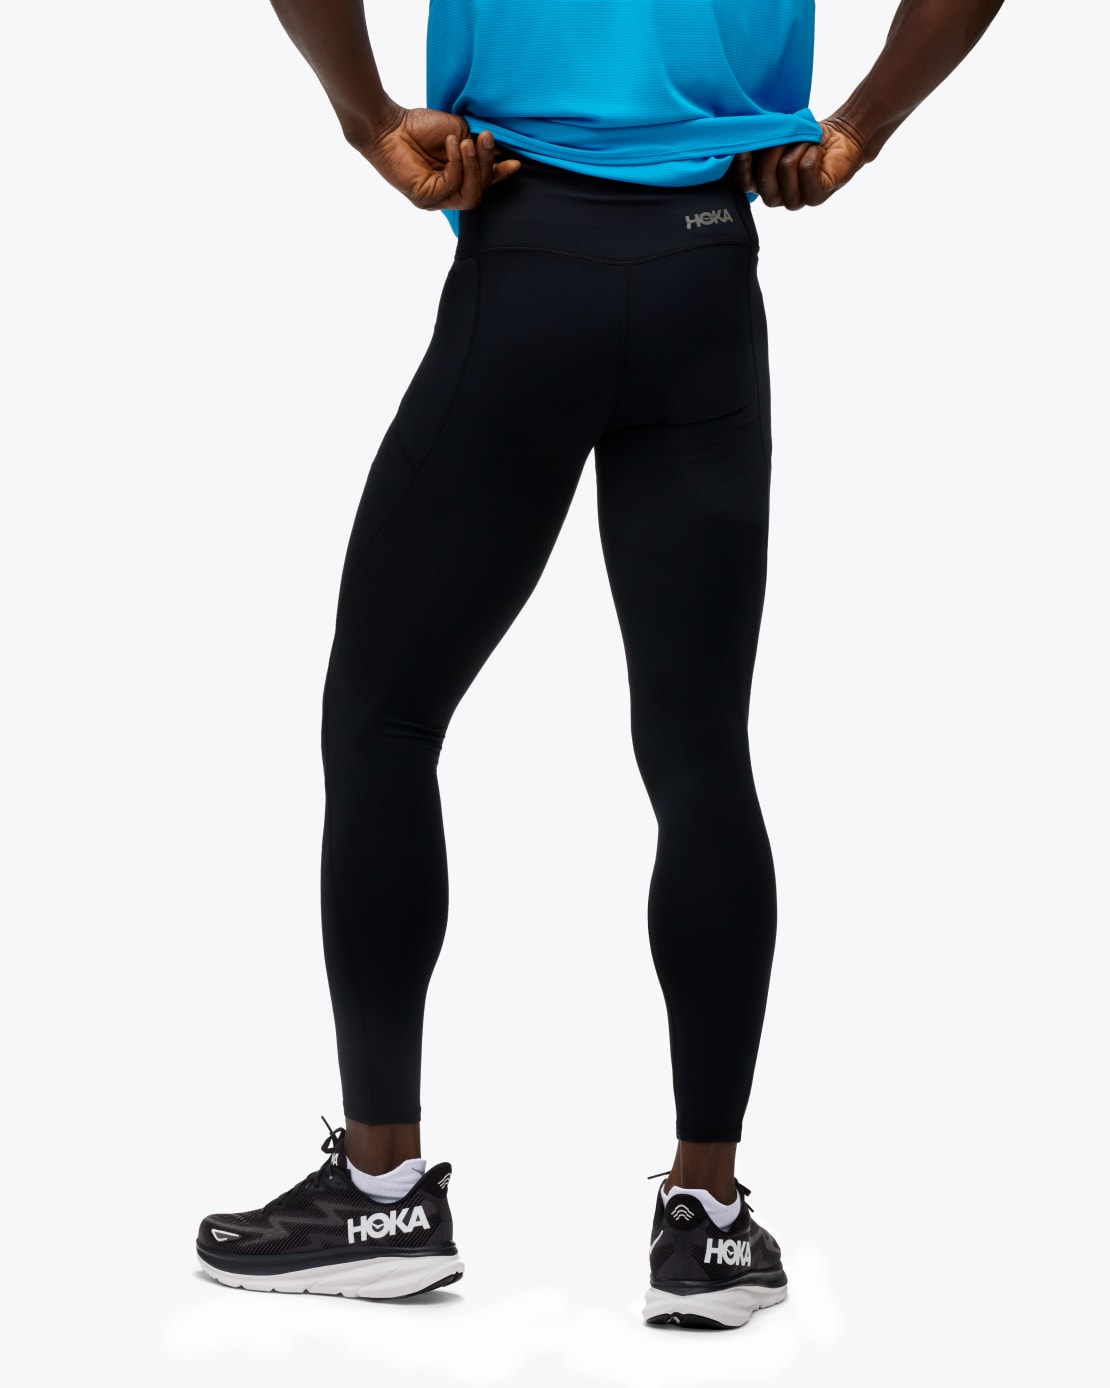 Last One! Nike Pro Hyper Recovery Men's Compression Tights Retail $140